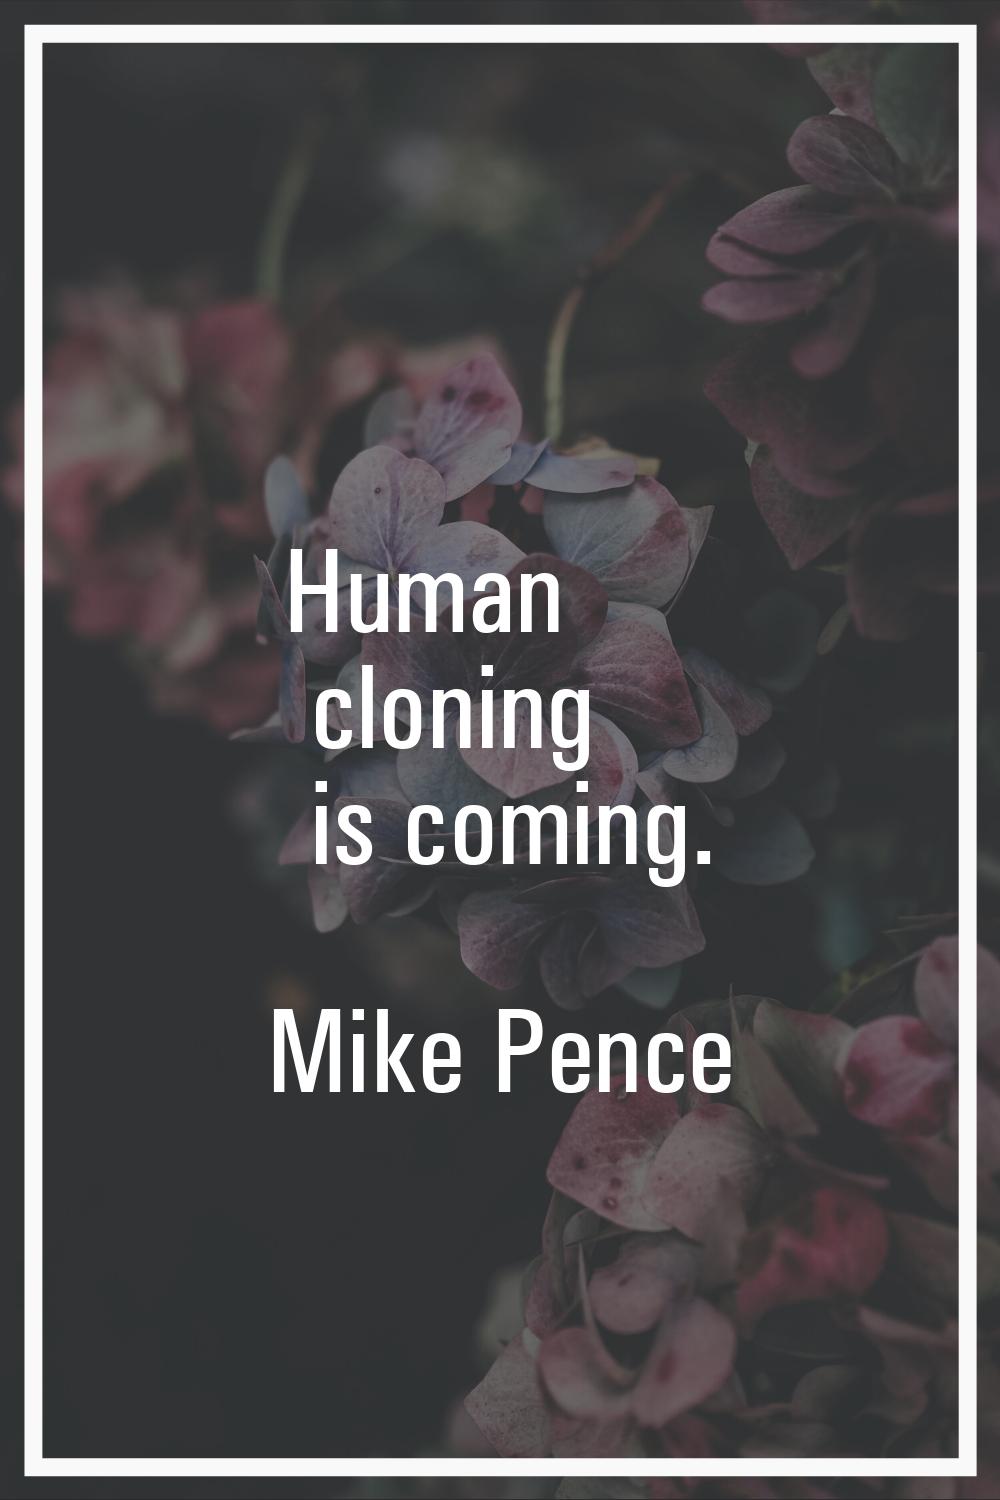 Human cloning is coming.